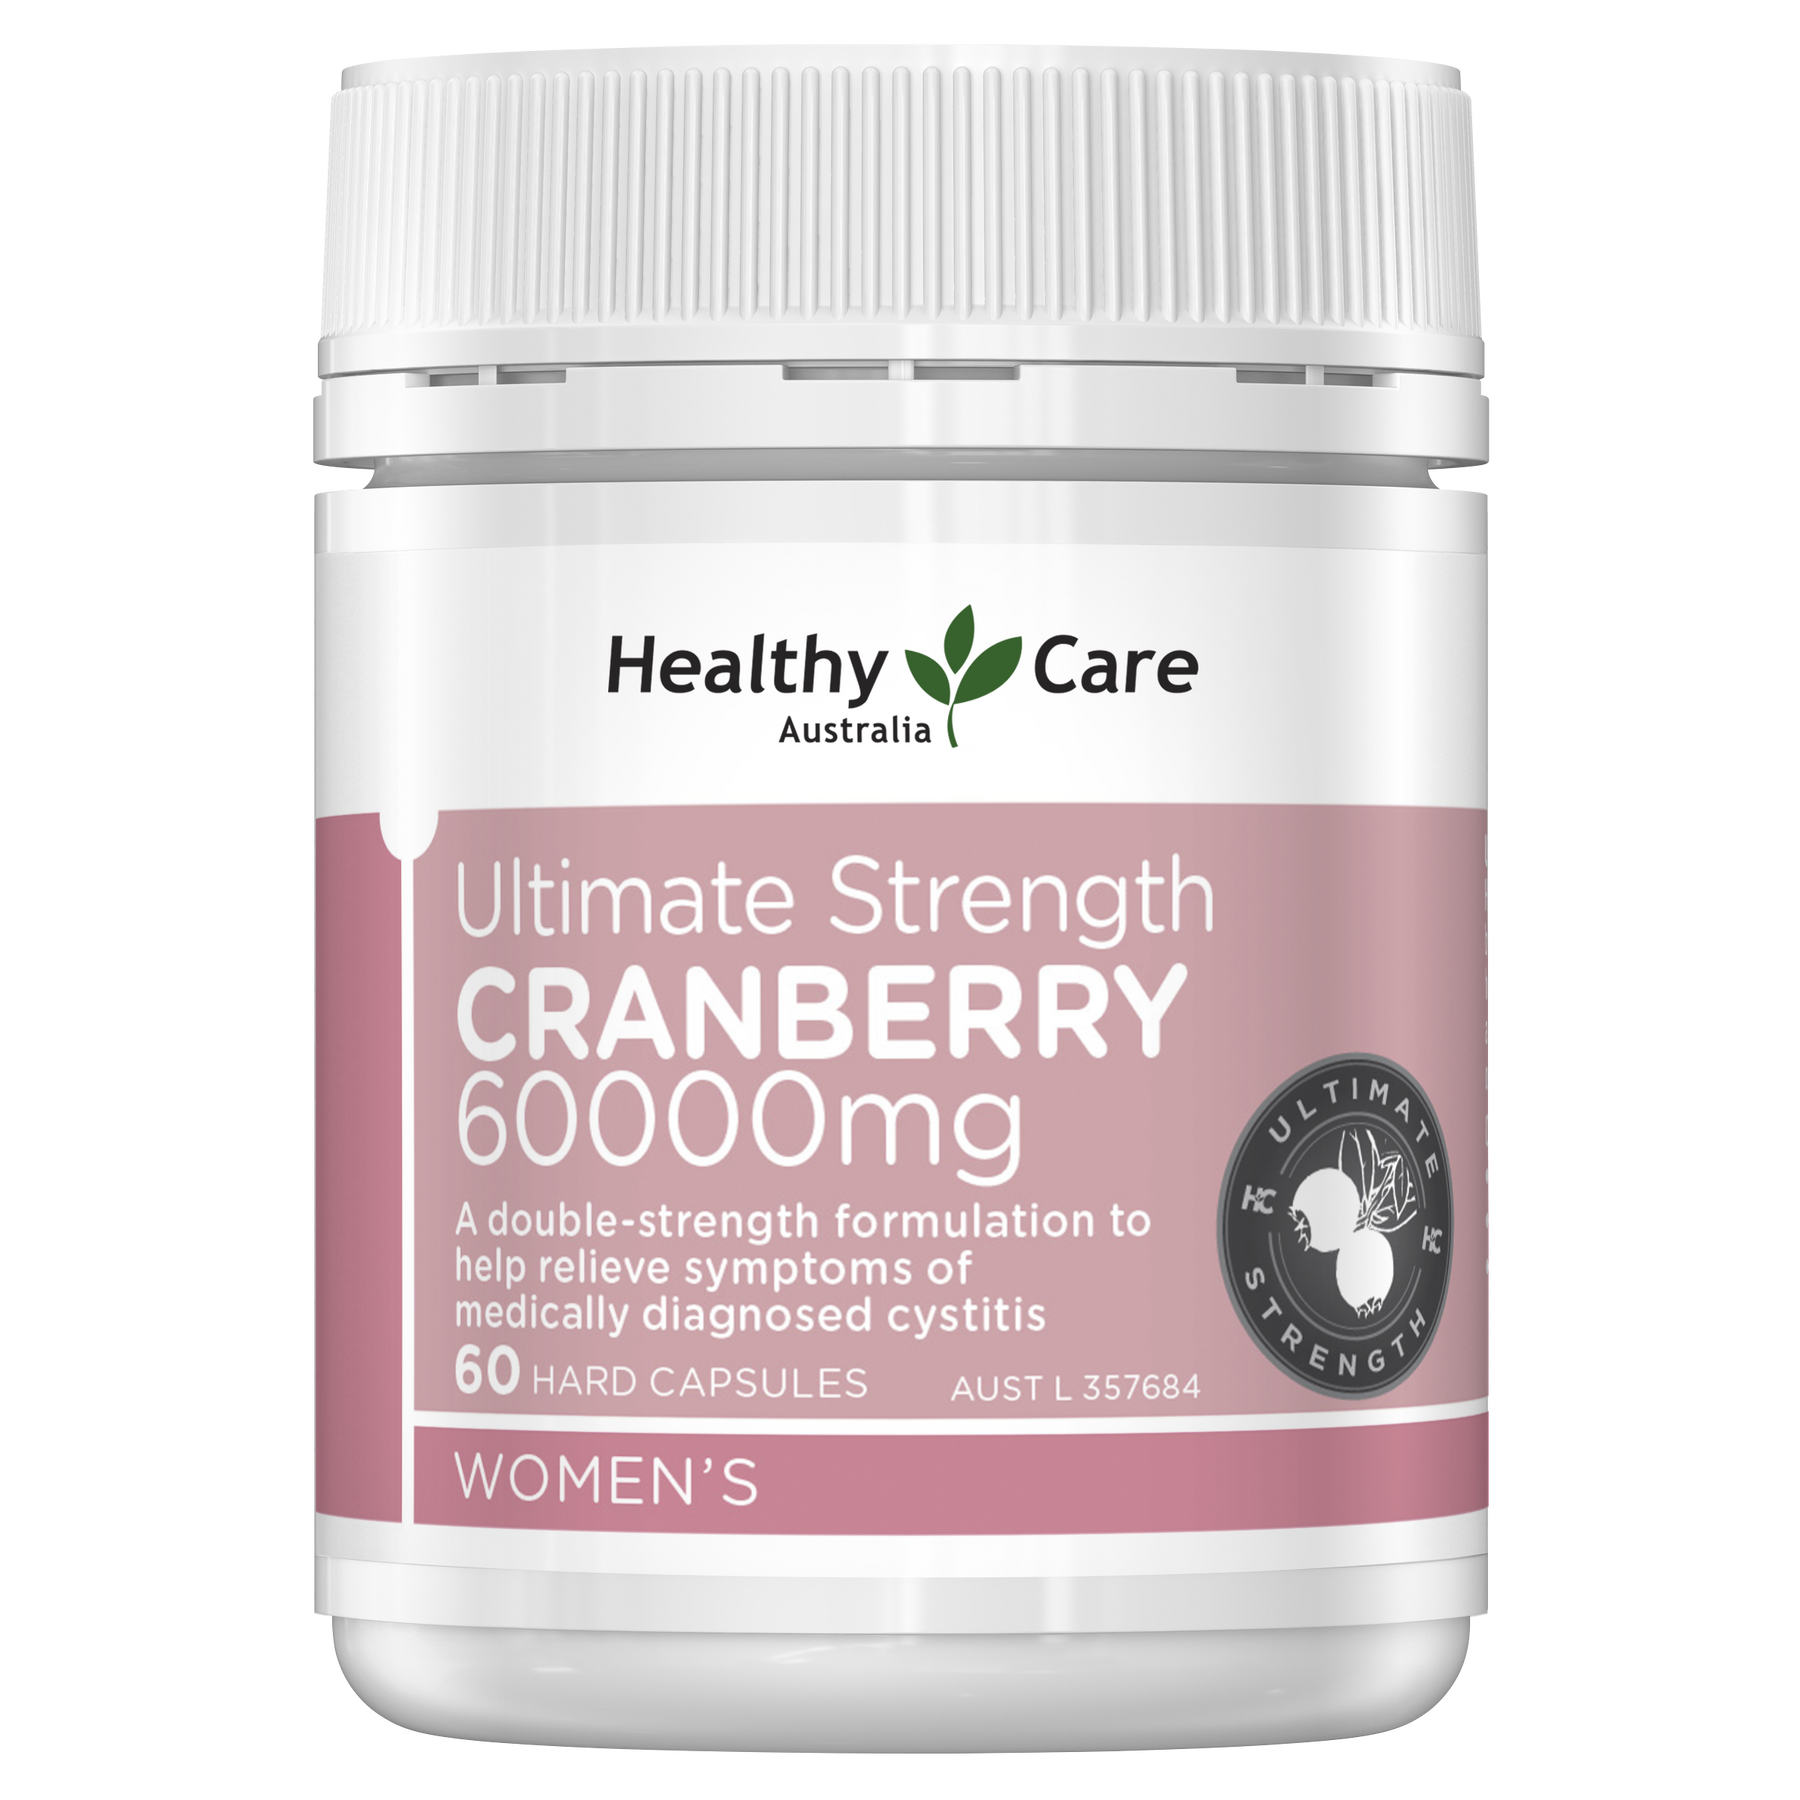 Healthy Care Ultimate Strength Cranberry 60000mg - 60 capsules